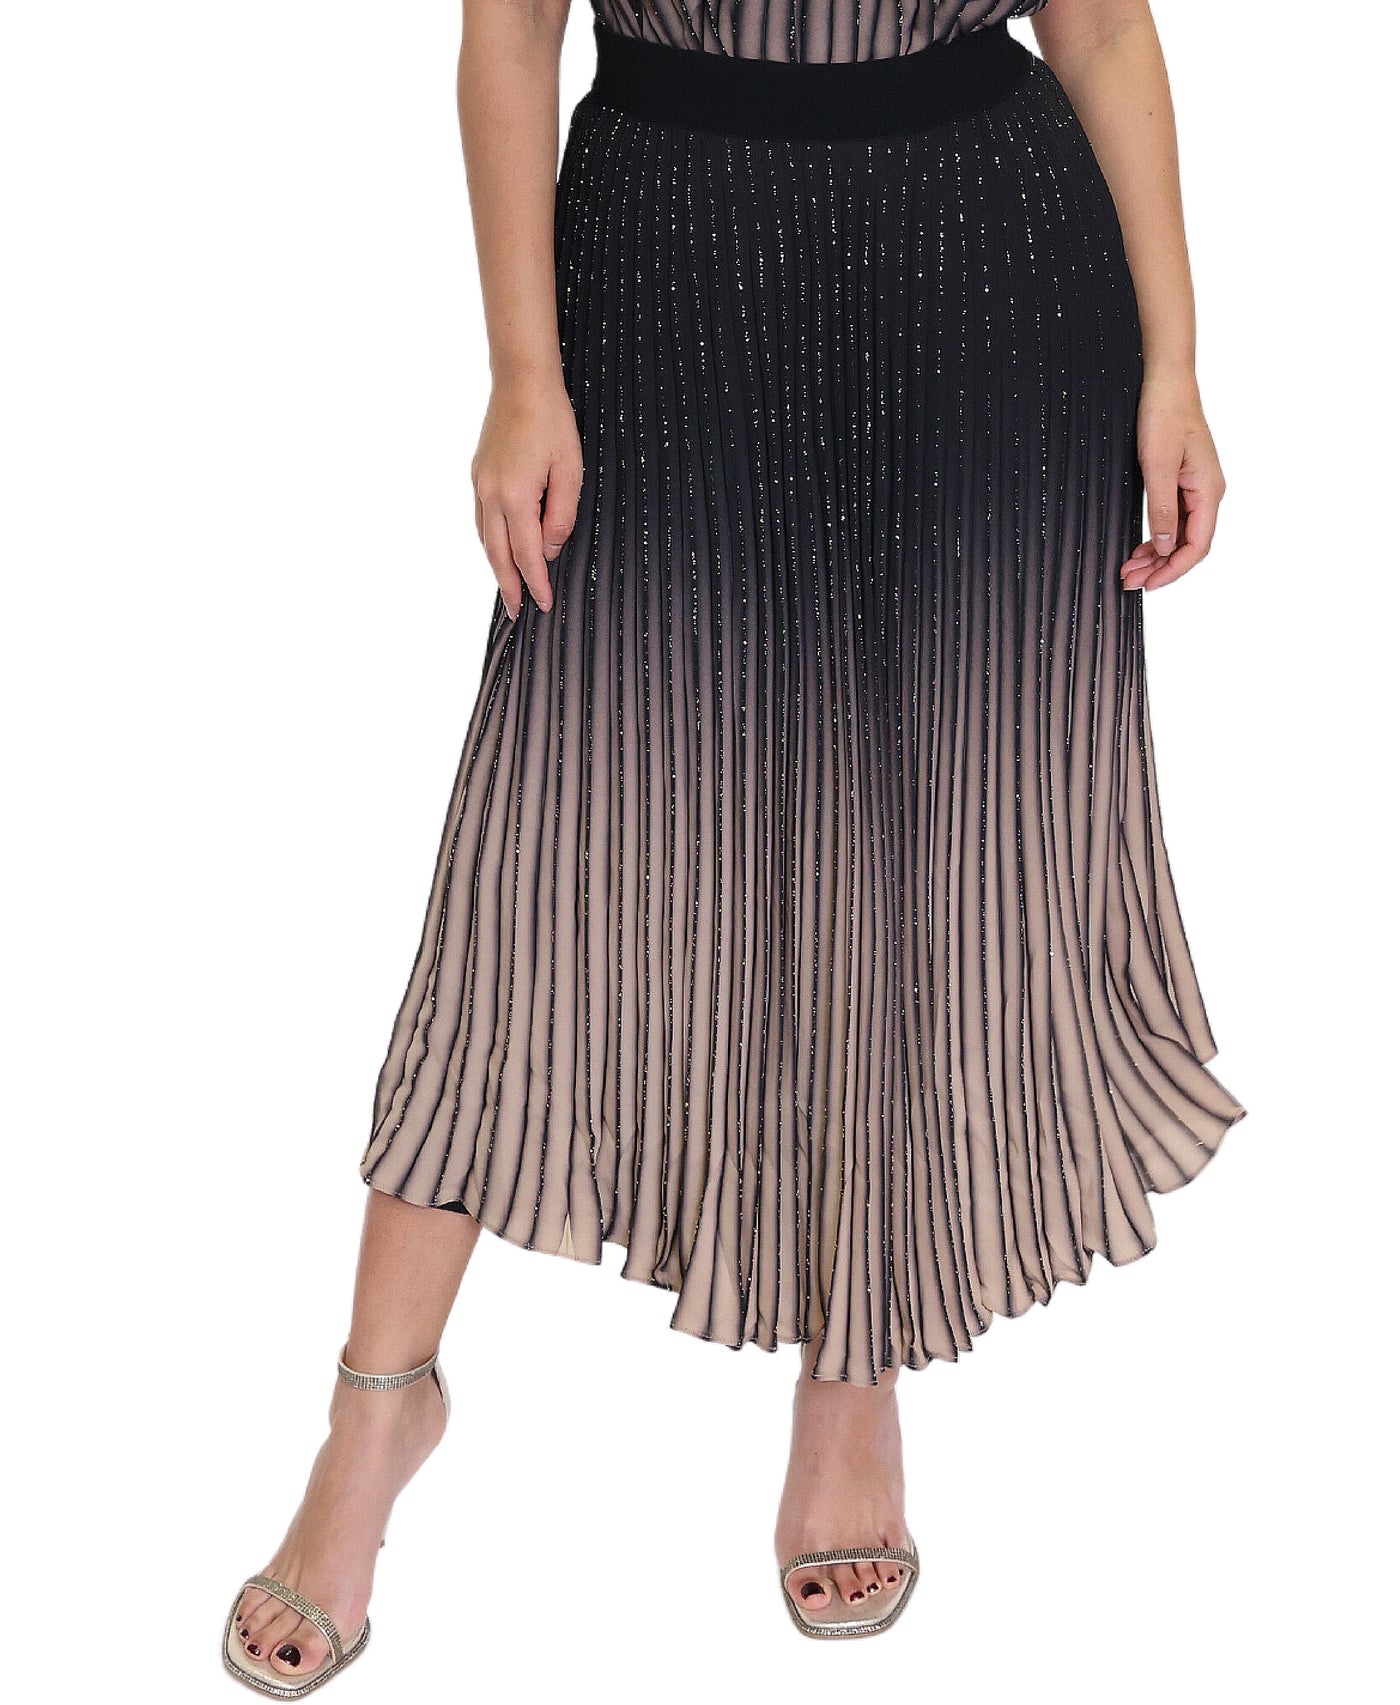 Ombre Pleated Skirt image 1